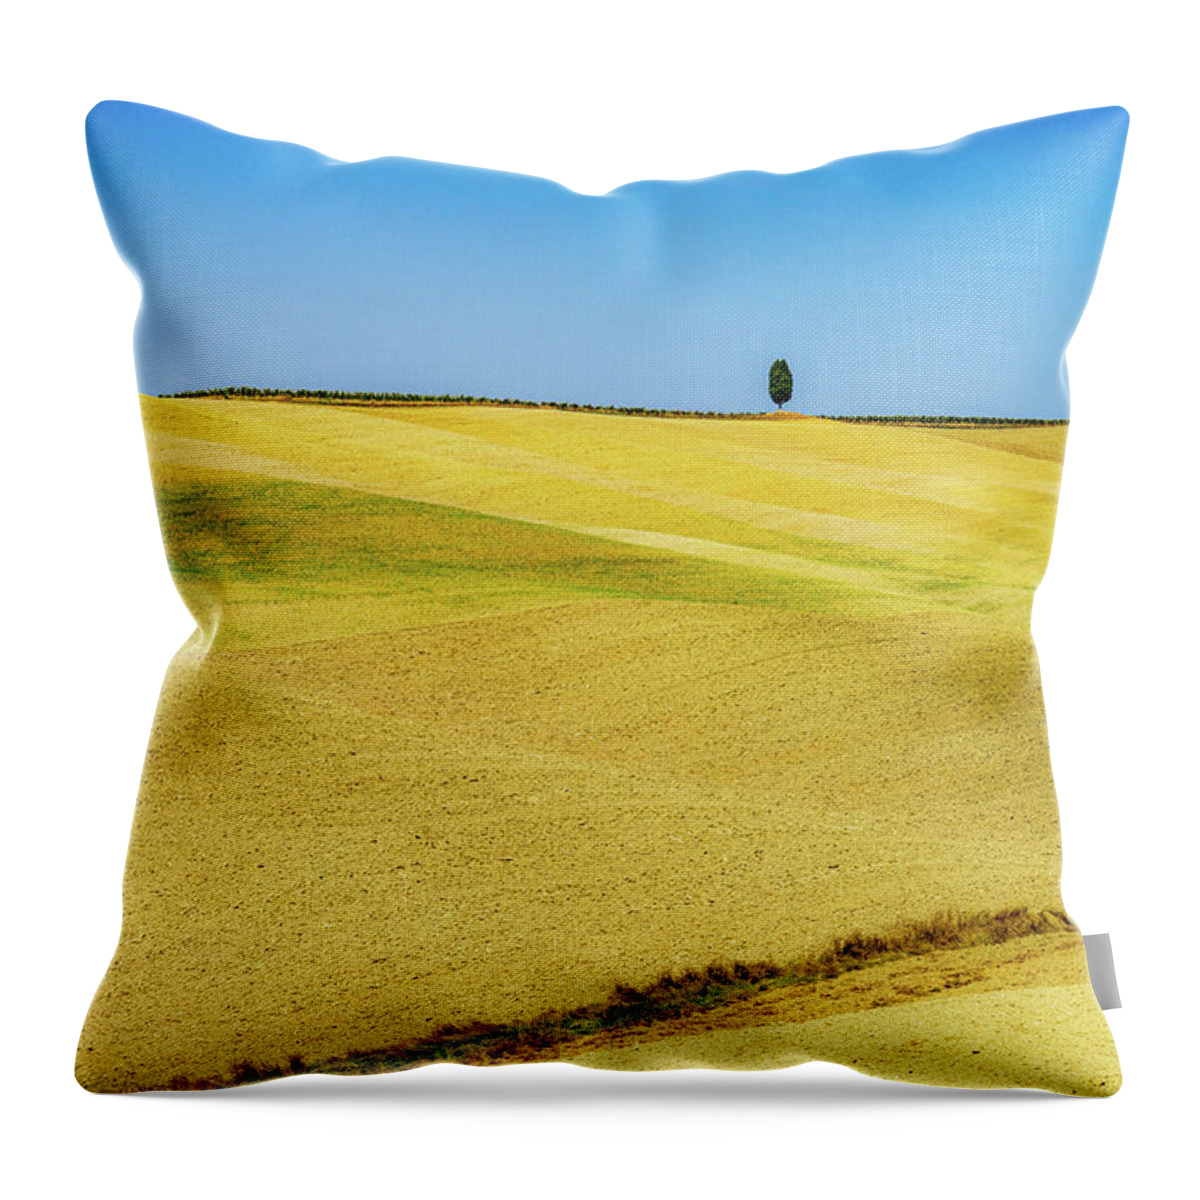 Tuscany Throw Pillow featuring the photograph Golden Tuscany by Marian Tagliarino